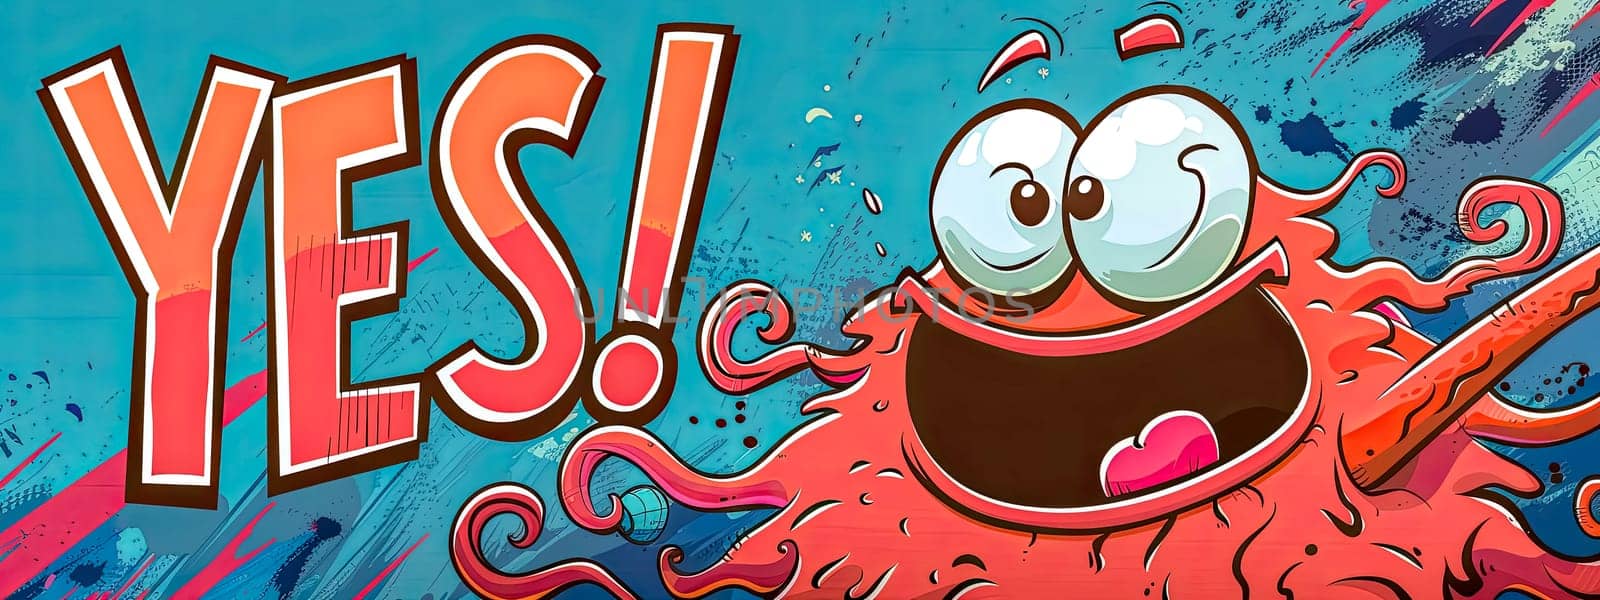 Colorful illustration of a cheerful cartoon character surrounded by dynamic expression